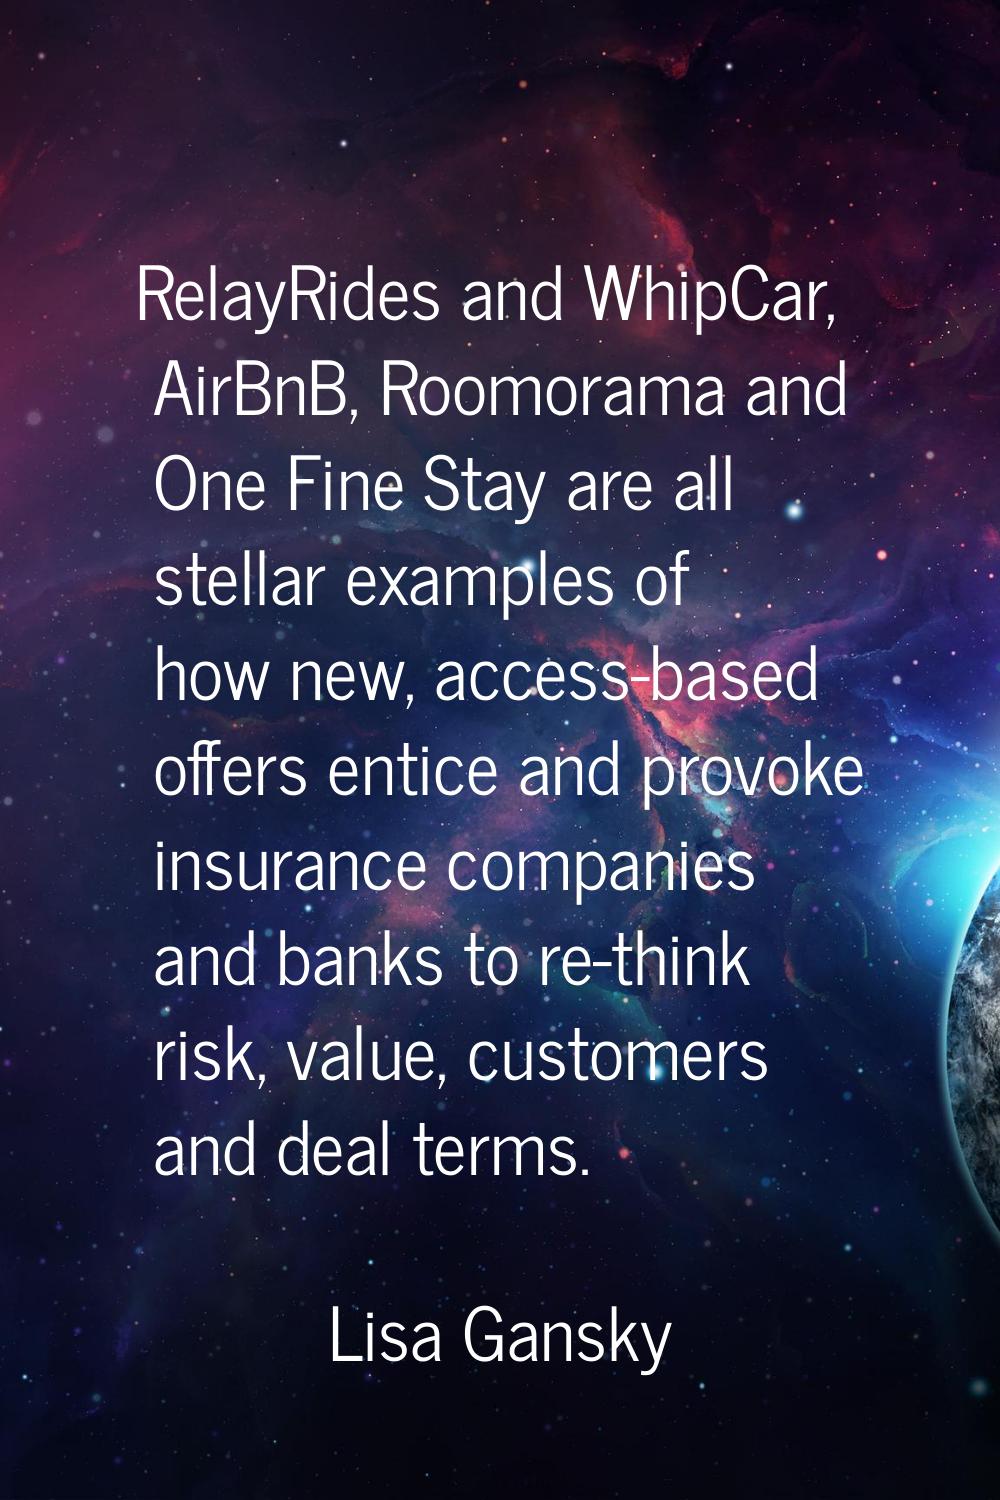 RelayRides and WhipCar, AirBnB, Roomorama and One Fine Stay are all stellar examples of how new, ac